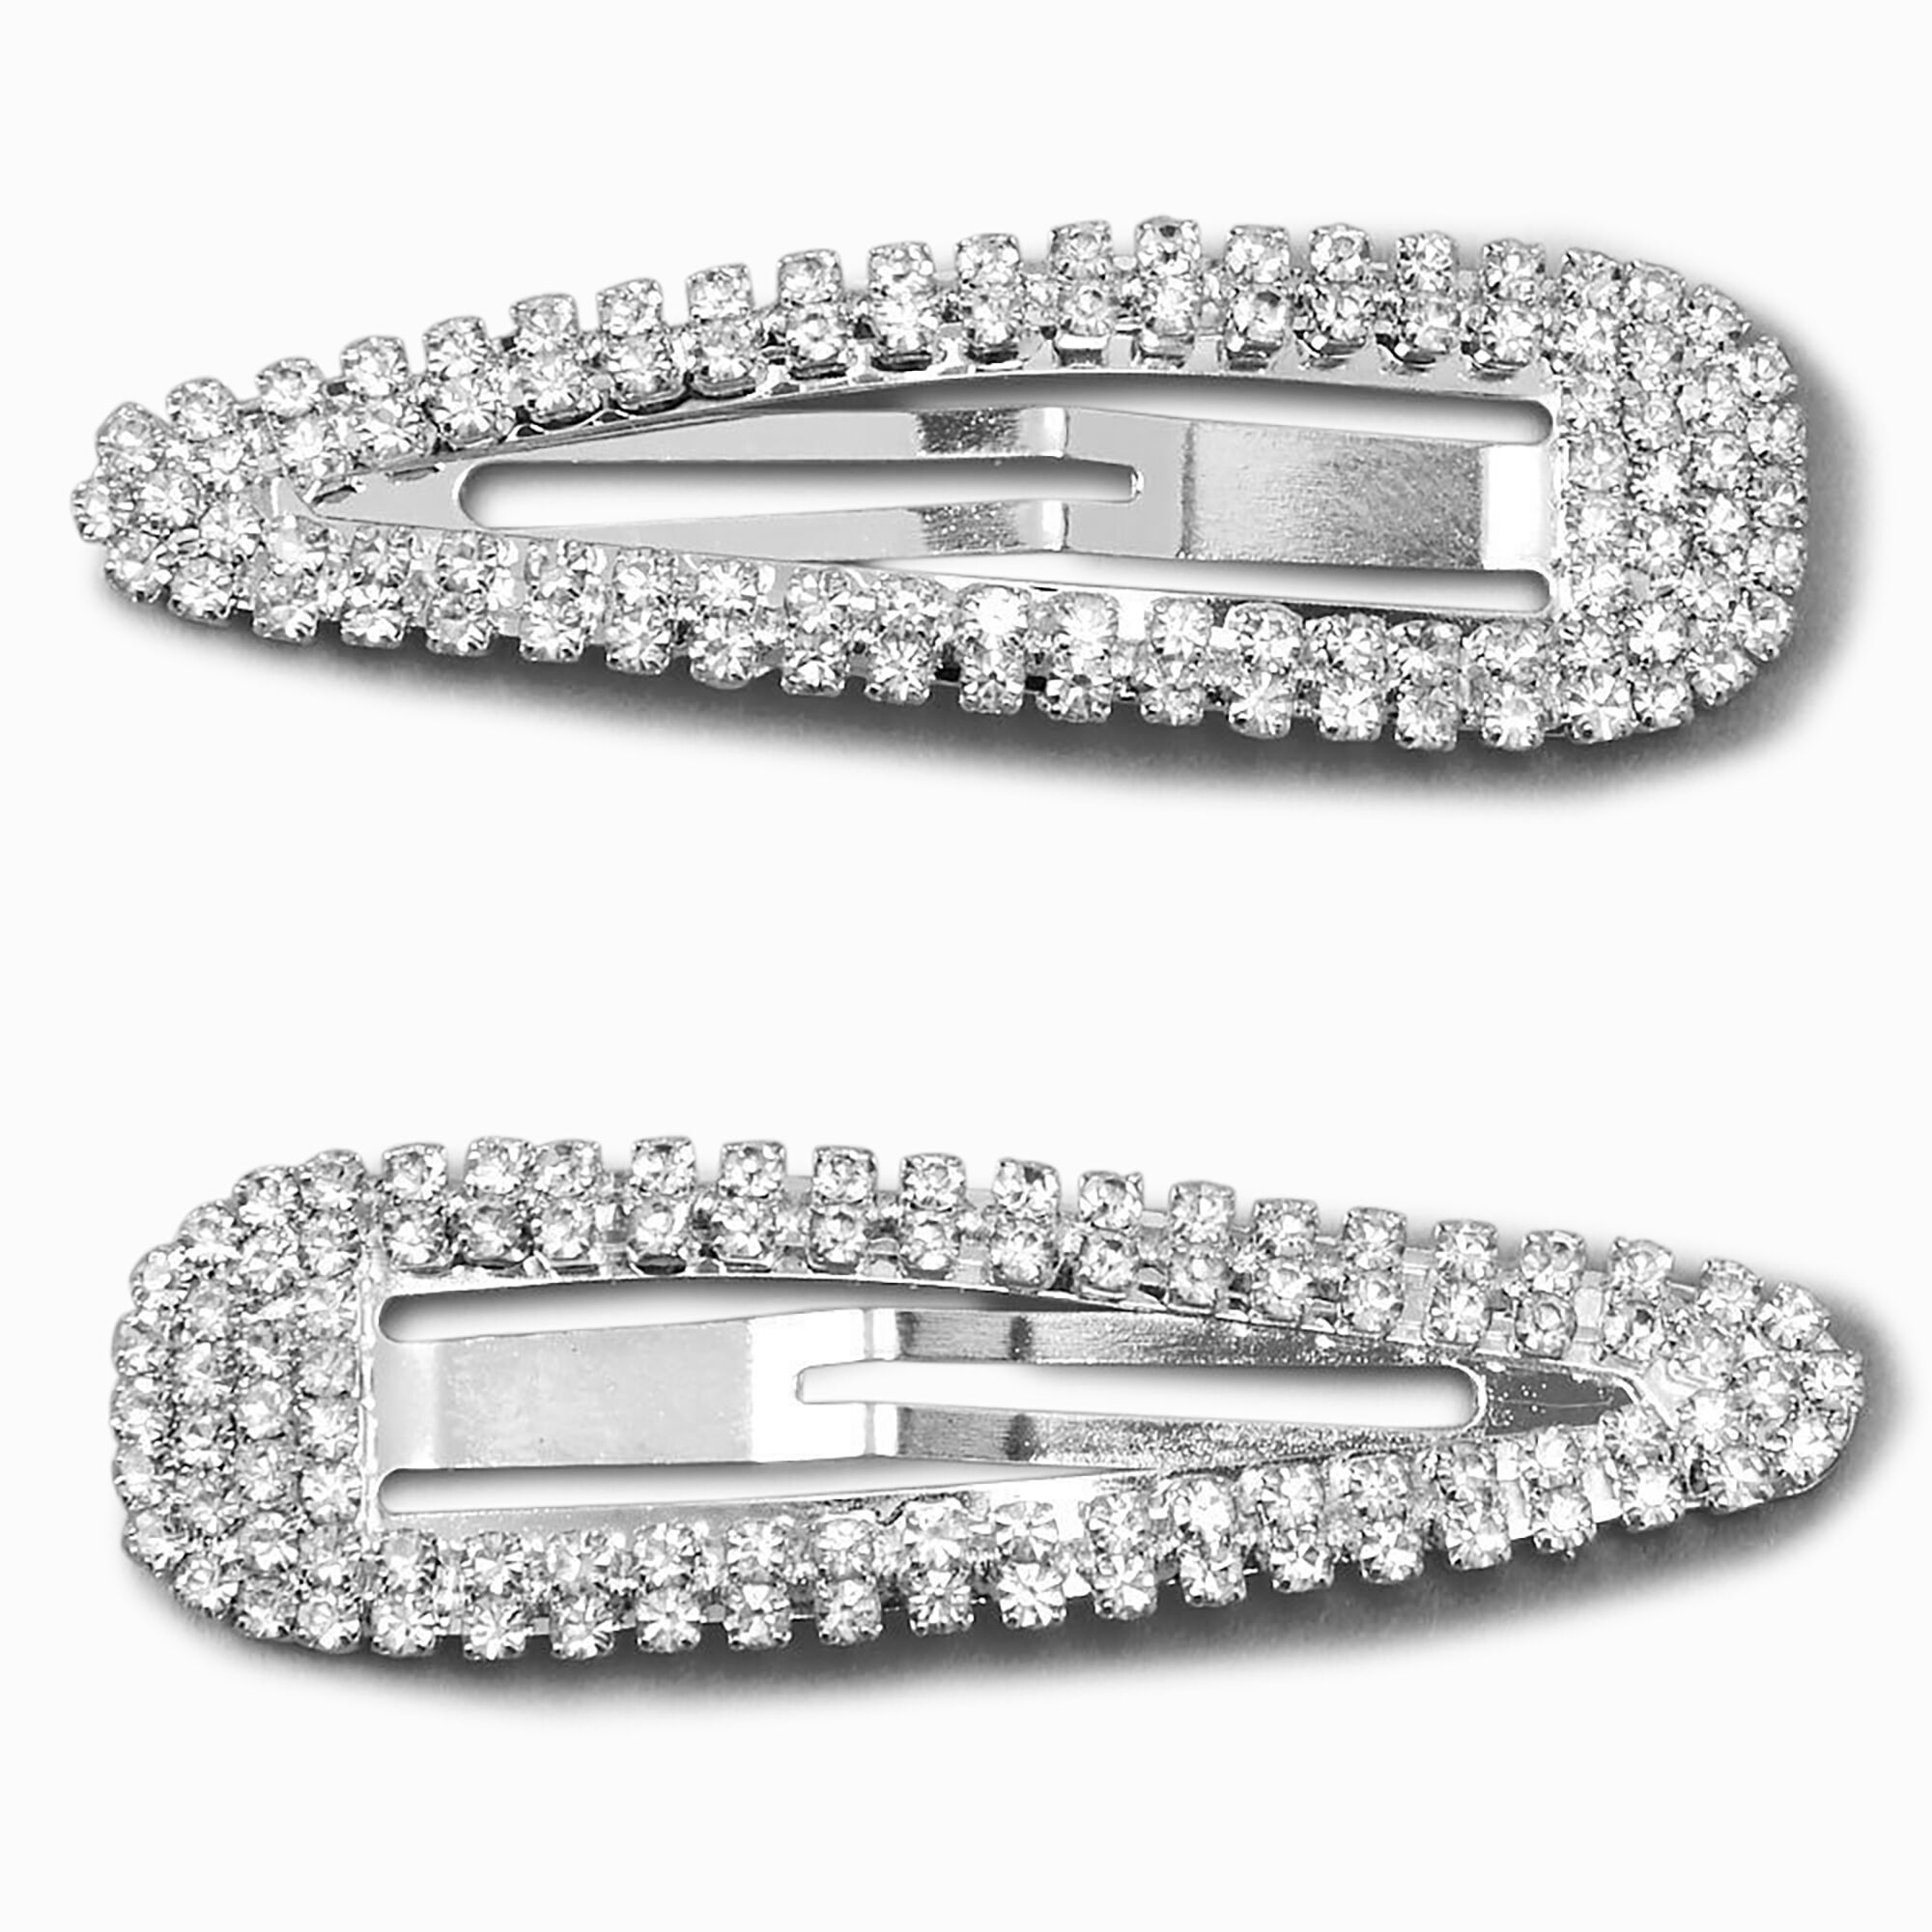 View Claires Tone Rhinestone Snap Clips 2 Pack Silver information